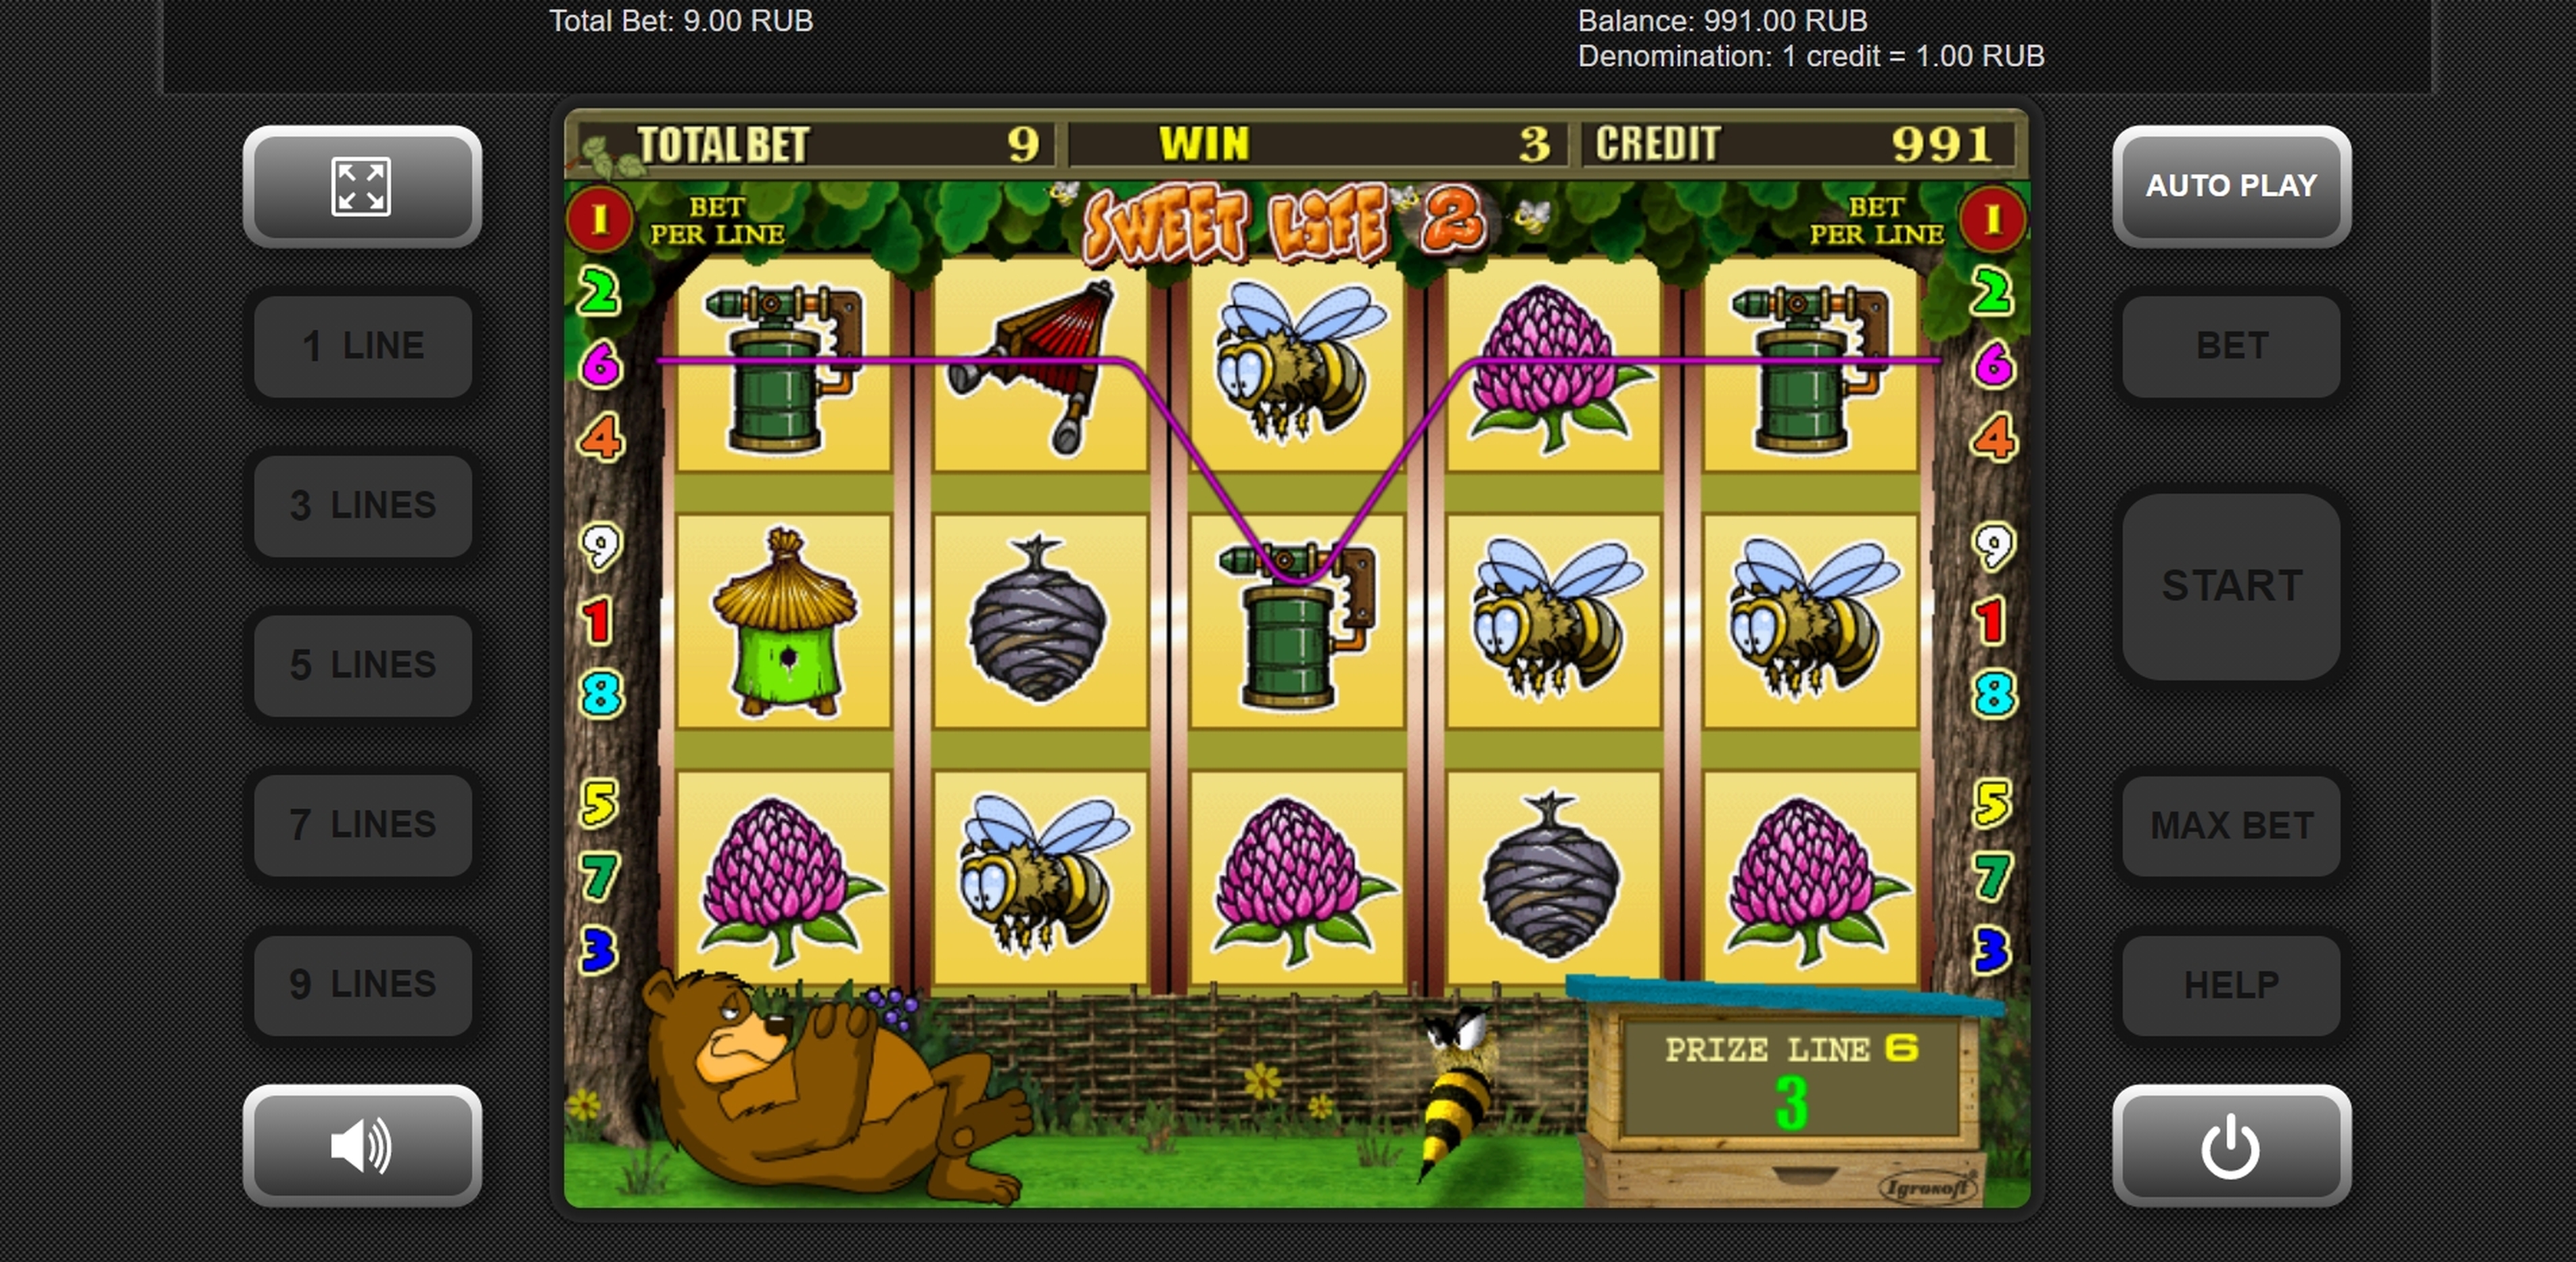 Win Money in Sweet Life 2 Free Slot Game by Igrosoft